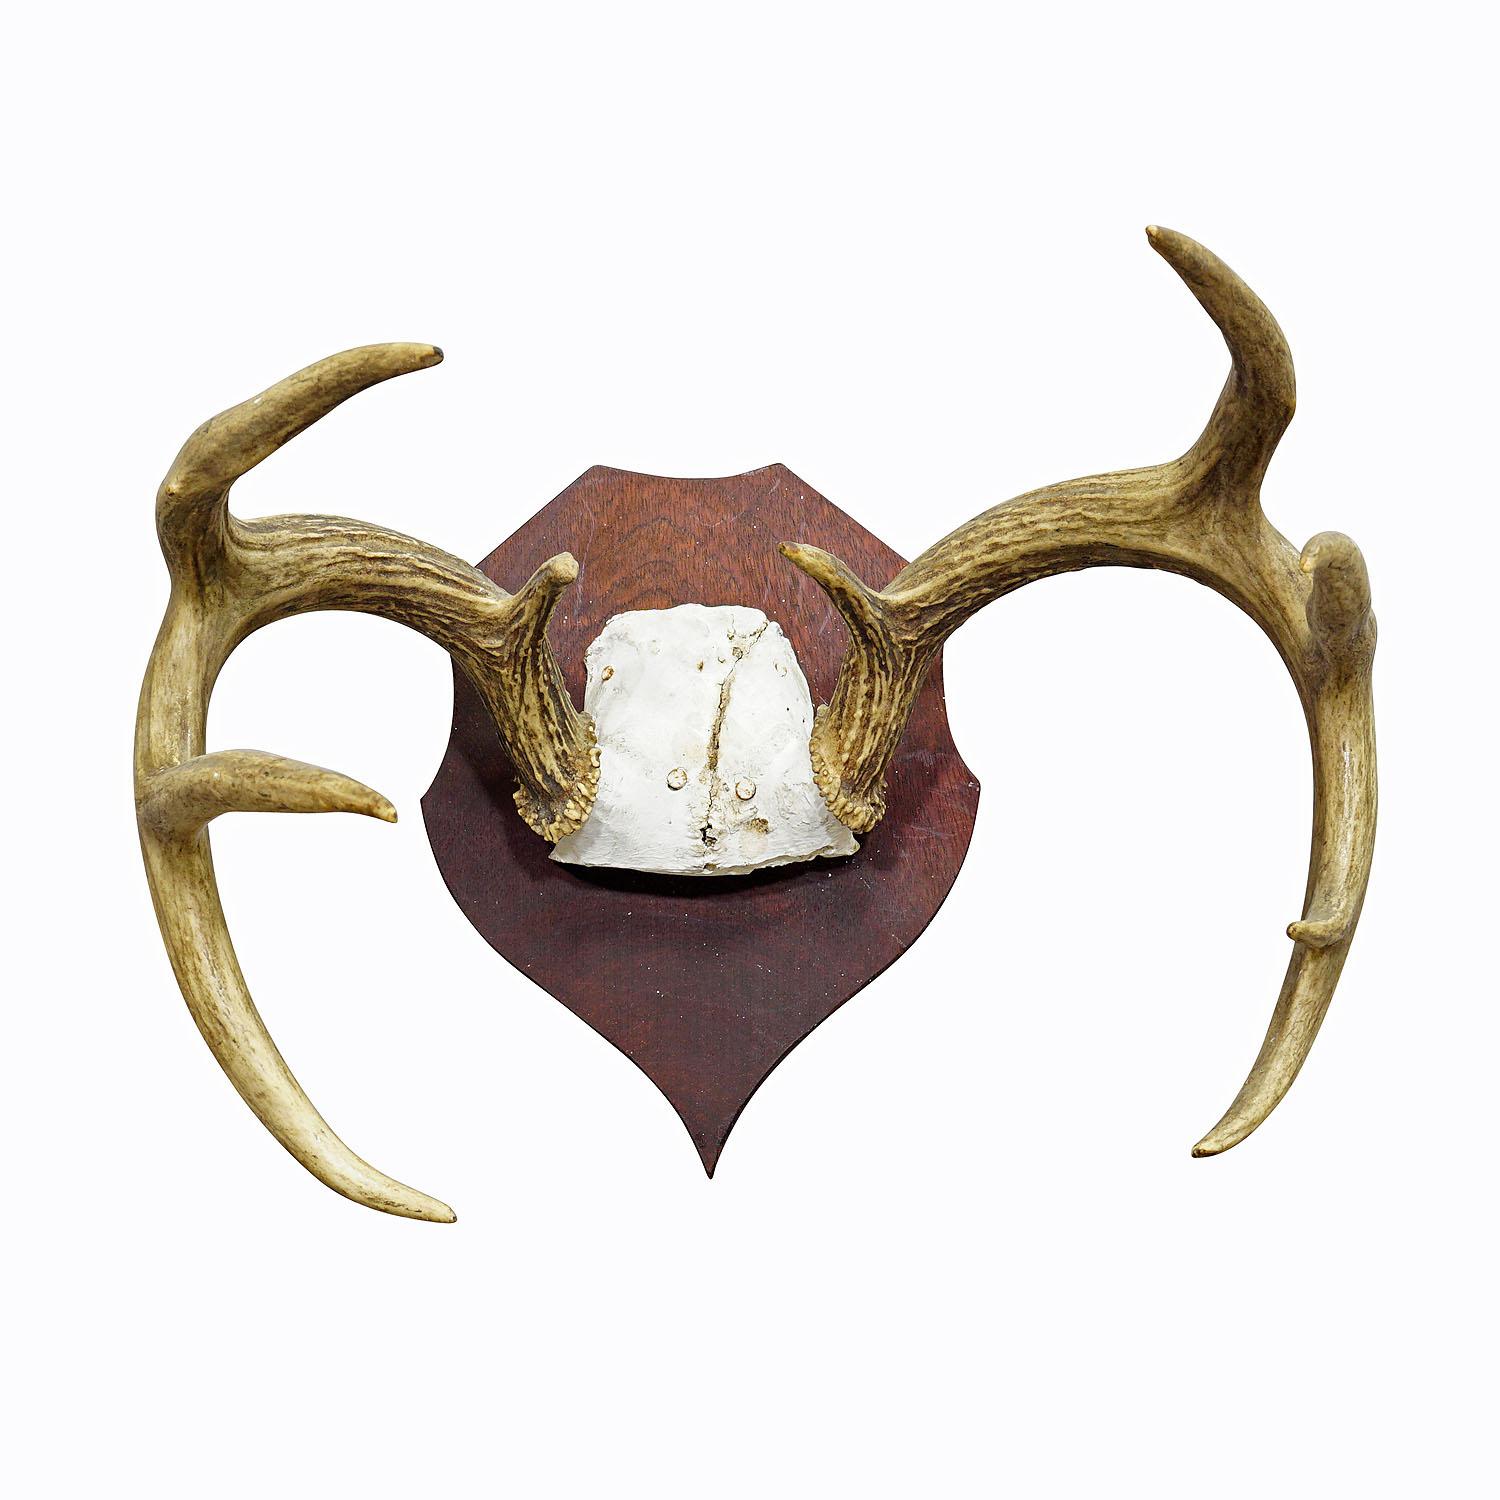 White Tailed Deer Trophy Mount on Wooden Plaque ca. 1900s

A large antique white tailed deer (Odocoileus virginianus) trophy on a wooden plaque with dark finish. The trophy was shot in the late 19th century. 

Trophies are mementos from the hunted